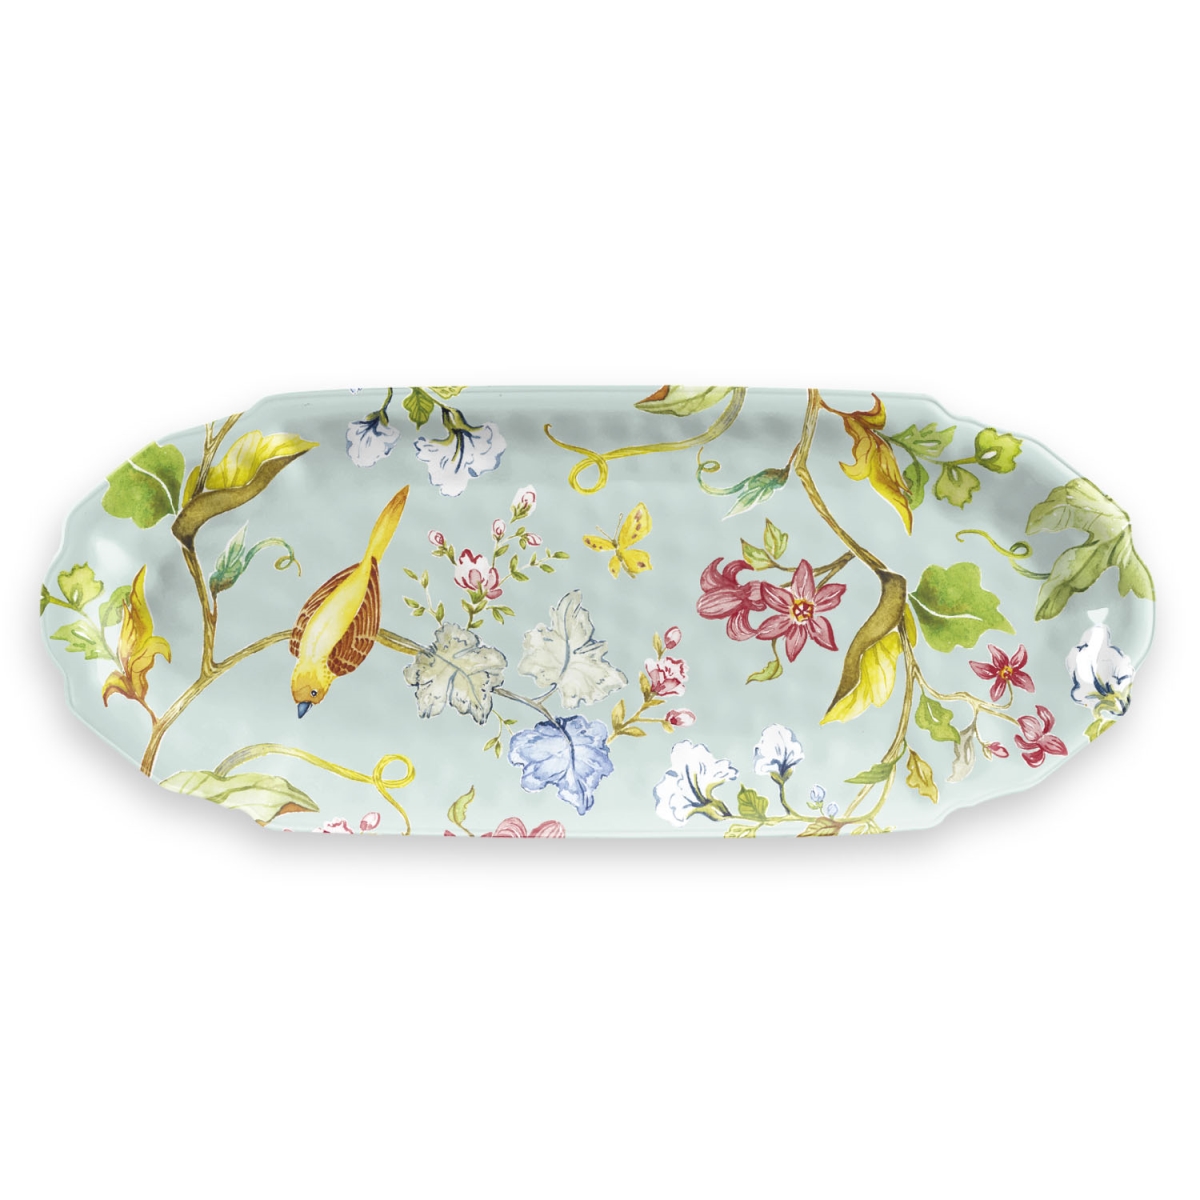 Pso0184satgl Spring Chinoiserie Appetizer Tray